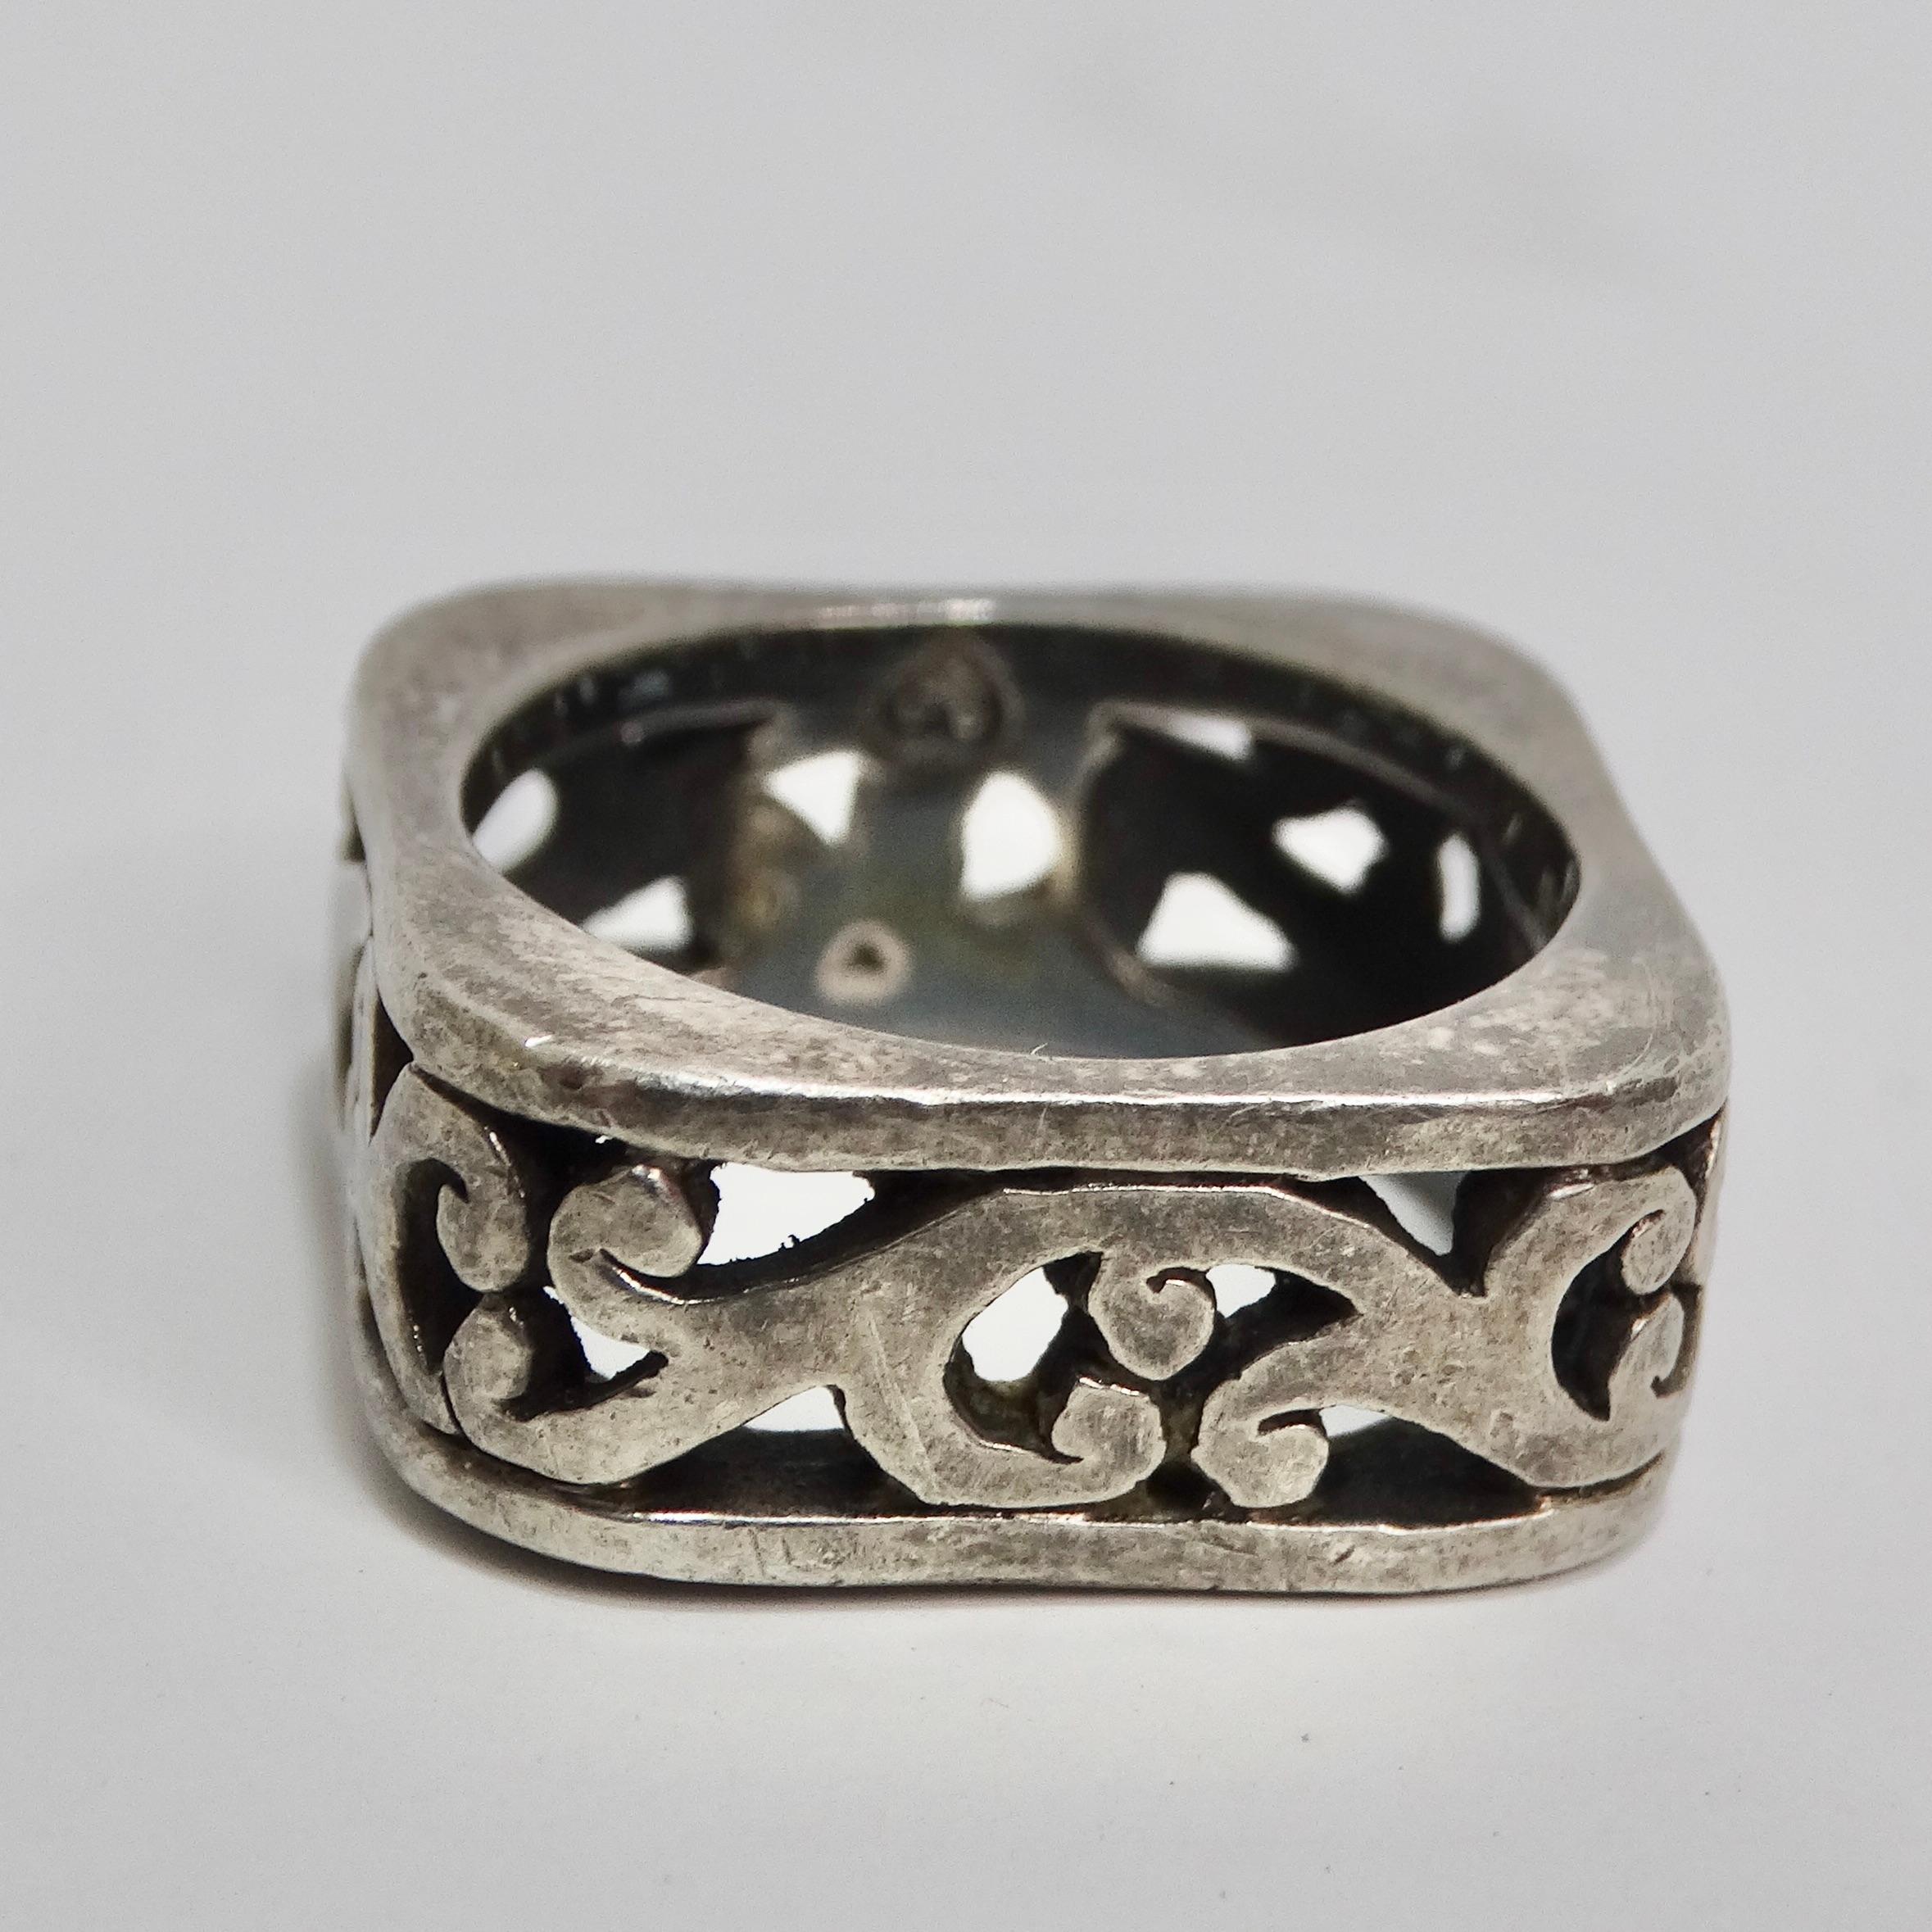 1970s Silver Engraved Ring In Good Condition For Sale In Scottsdale, AZ